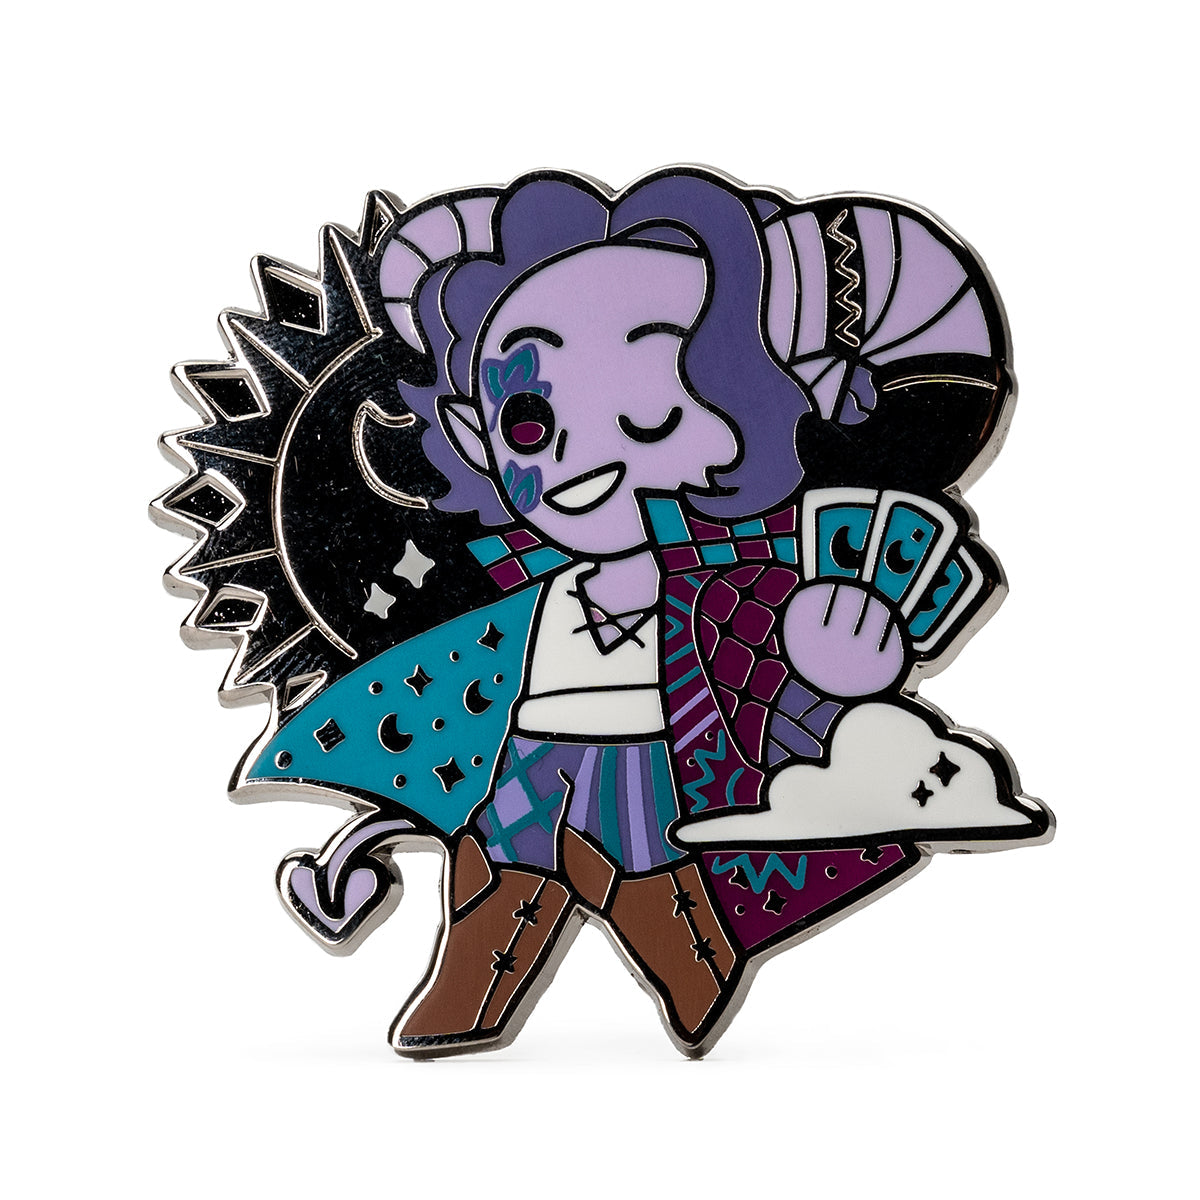 MollyMauk Tealeaf character inspired enamel pin from Critical Role campaign 3 Mighty Nein